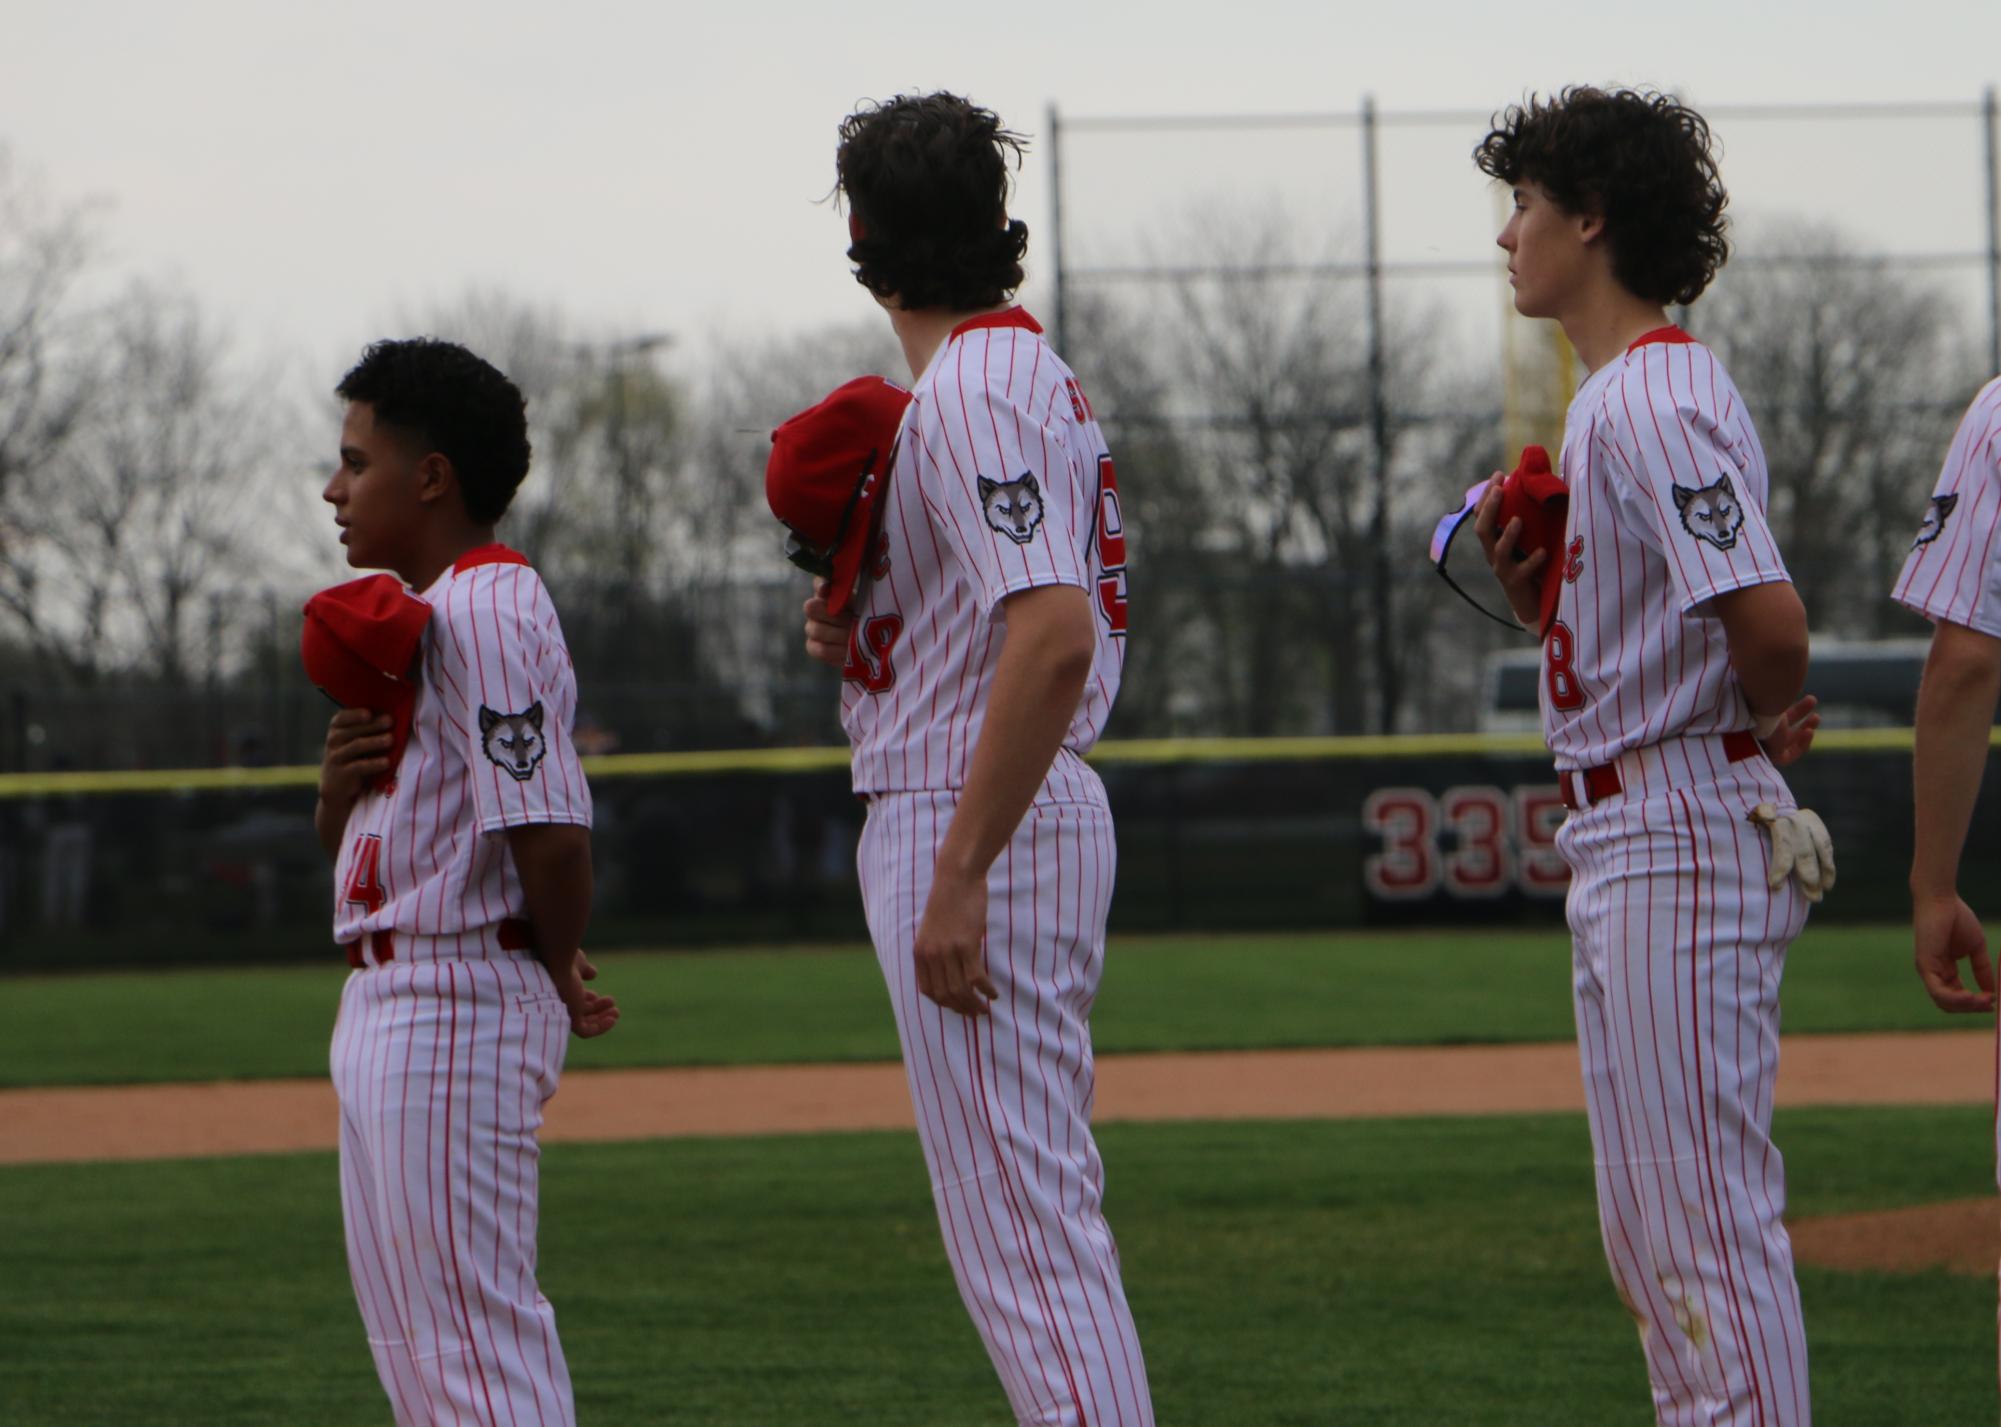 Niles West Baseball Dominates with Teamwork and Brotherly Bond